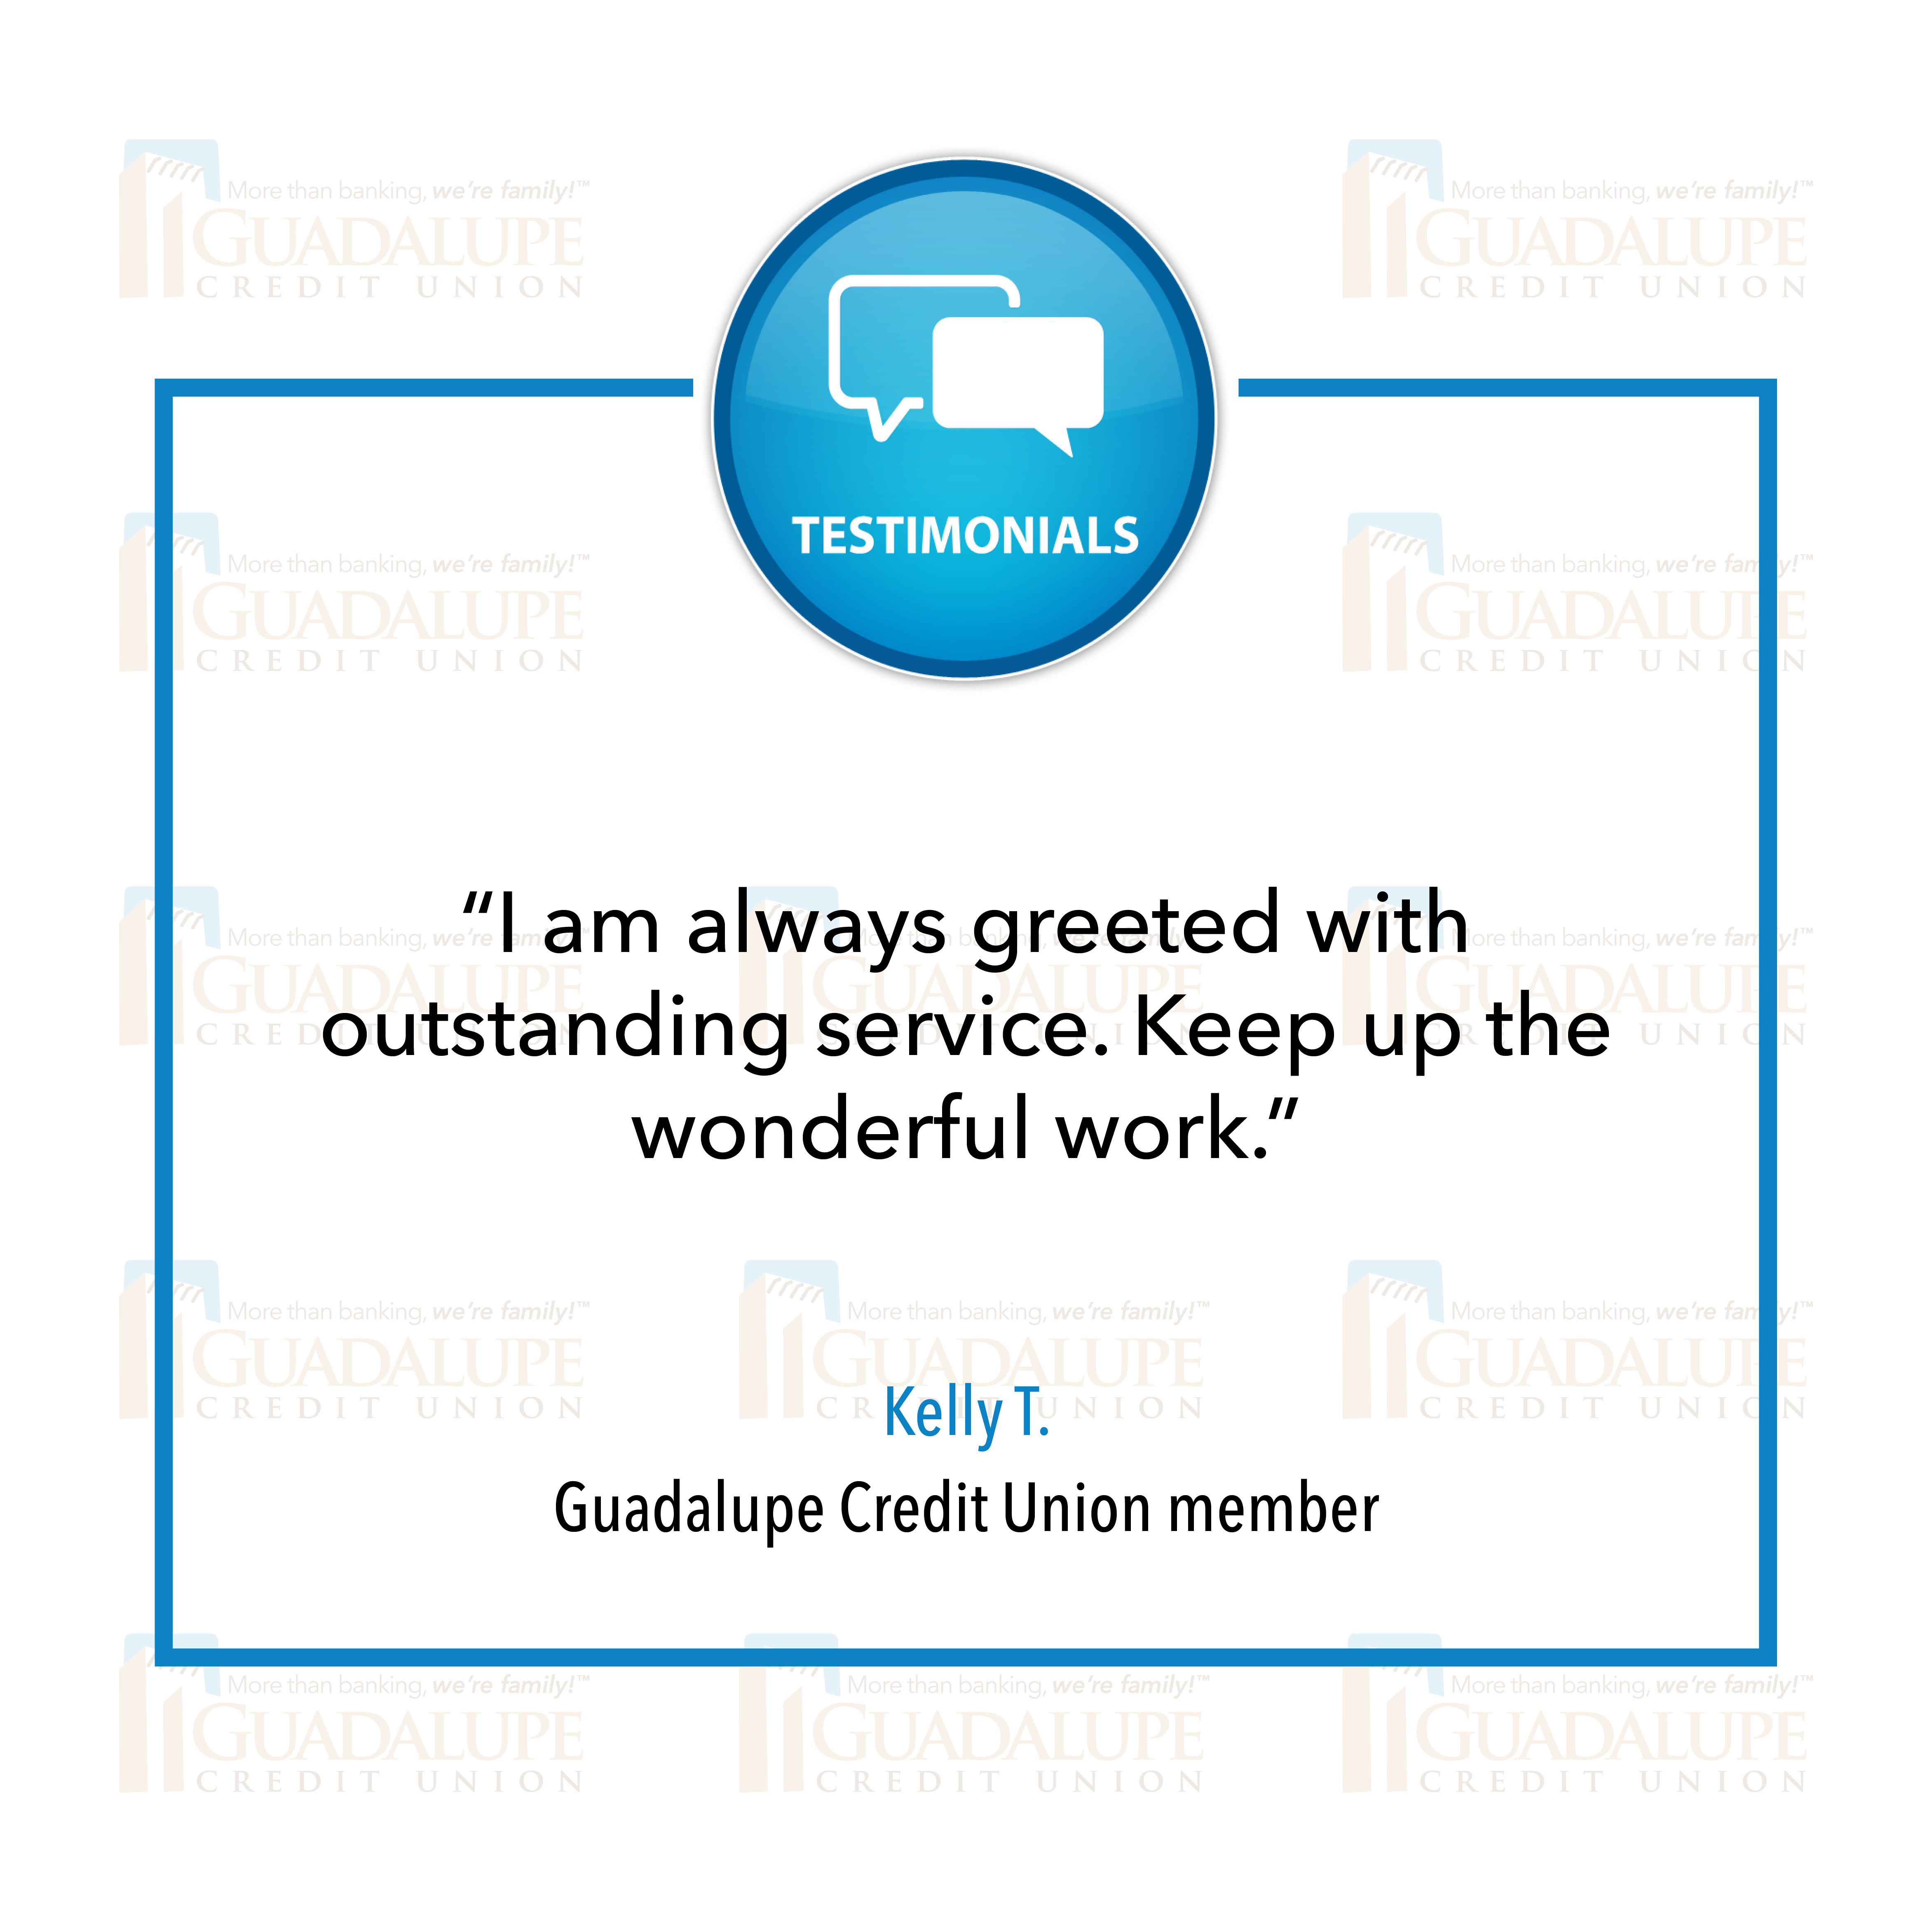 Member Testimonial - "I am always greeted with outstanding service. Keep up the wonderful work."